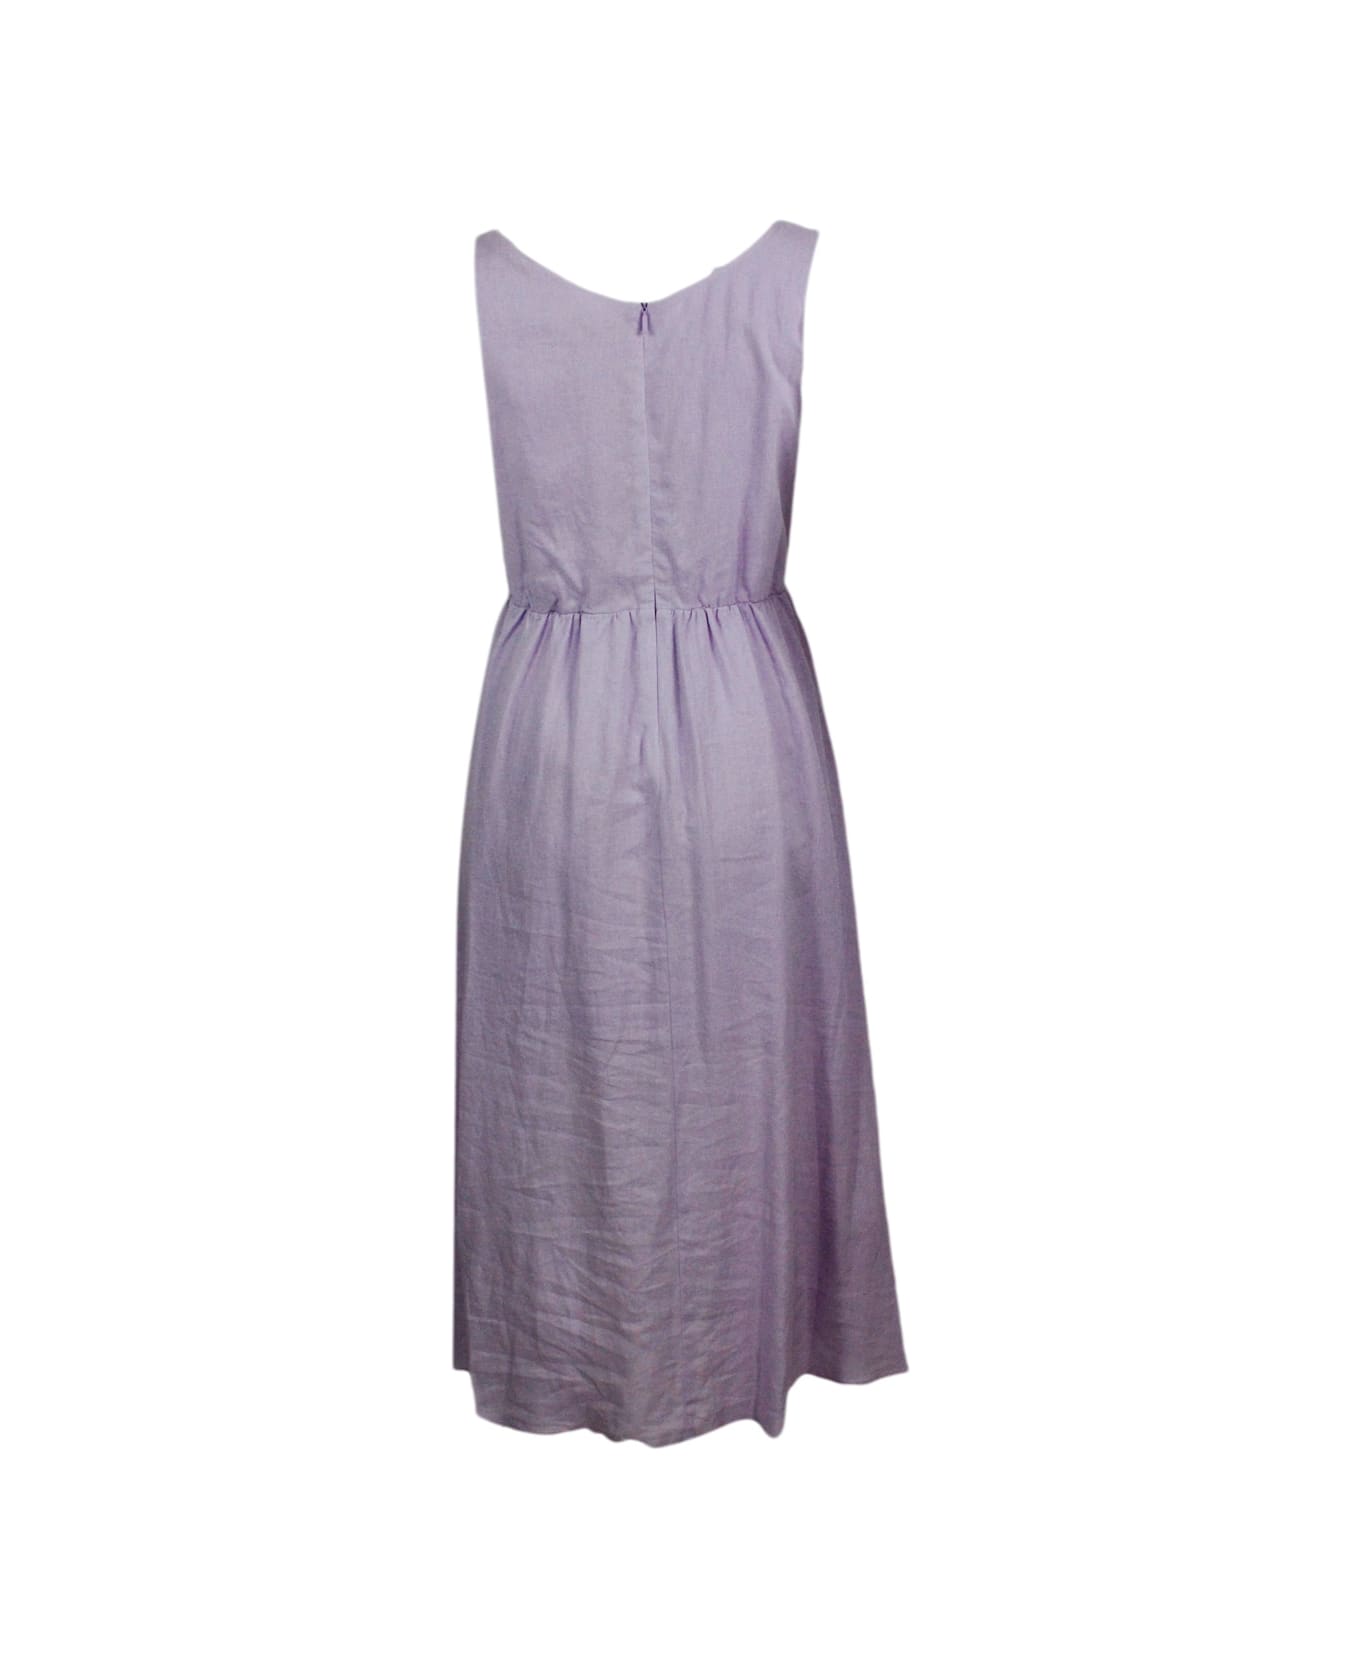 Armani Collezioni Sleeveless Dress Made Of Linen Blend With Elastic Gathering At The Waist. Welt Pockets - Pink ワンピース＆ドレス